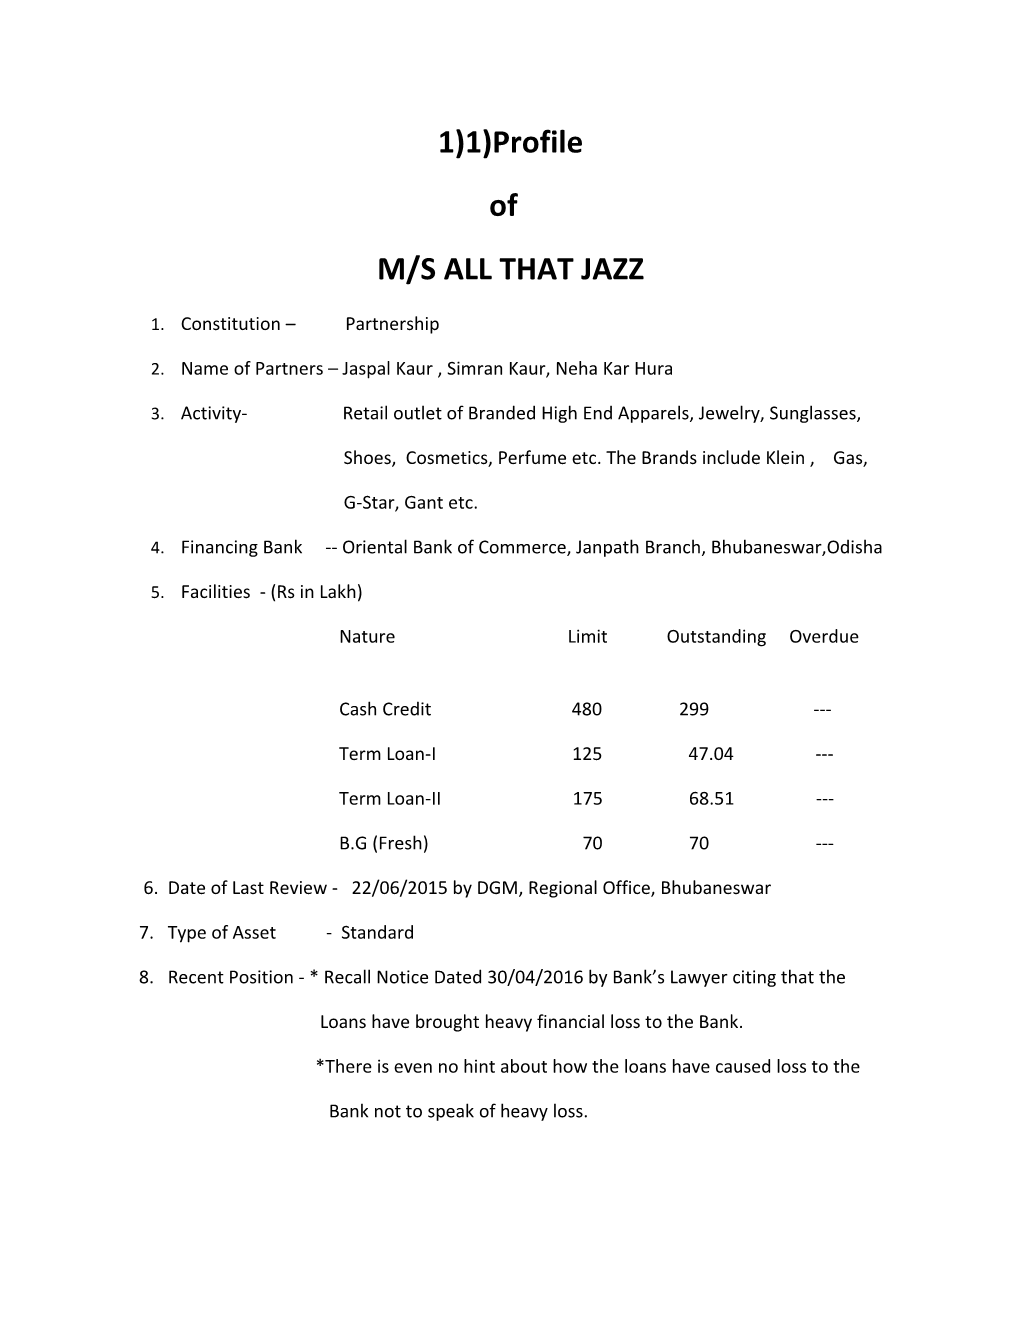 M/S All That Jazz